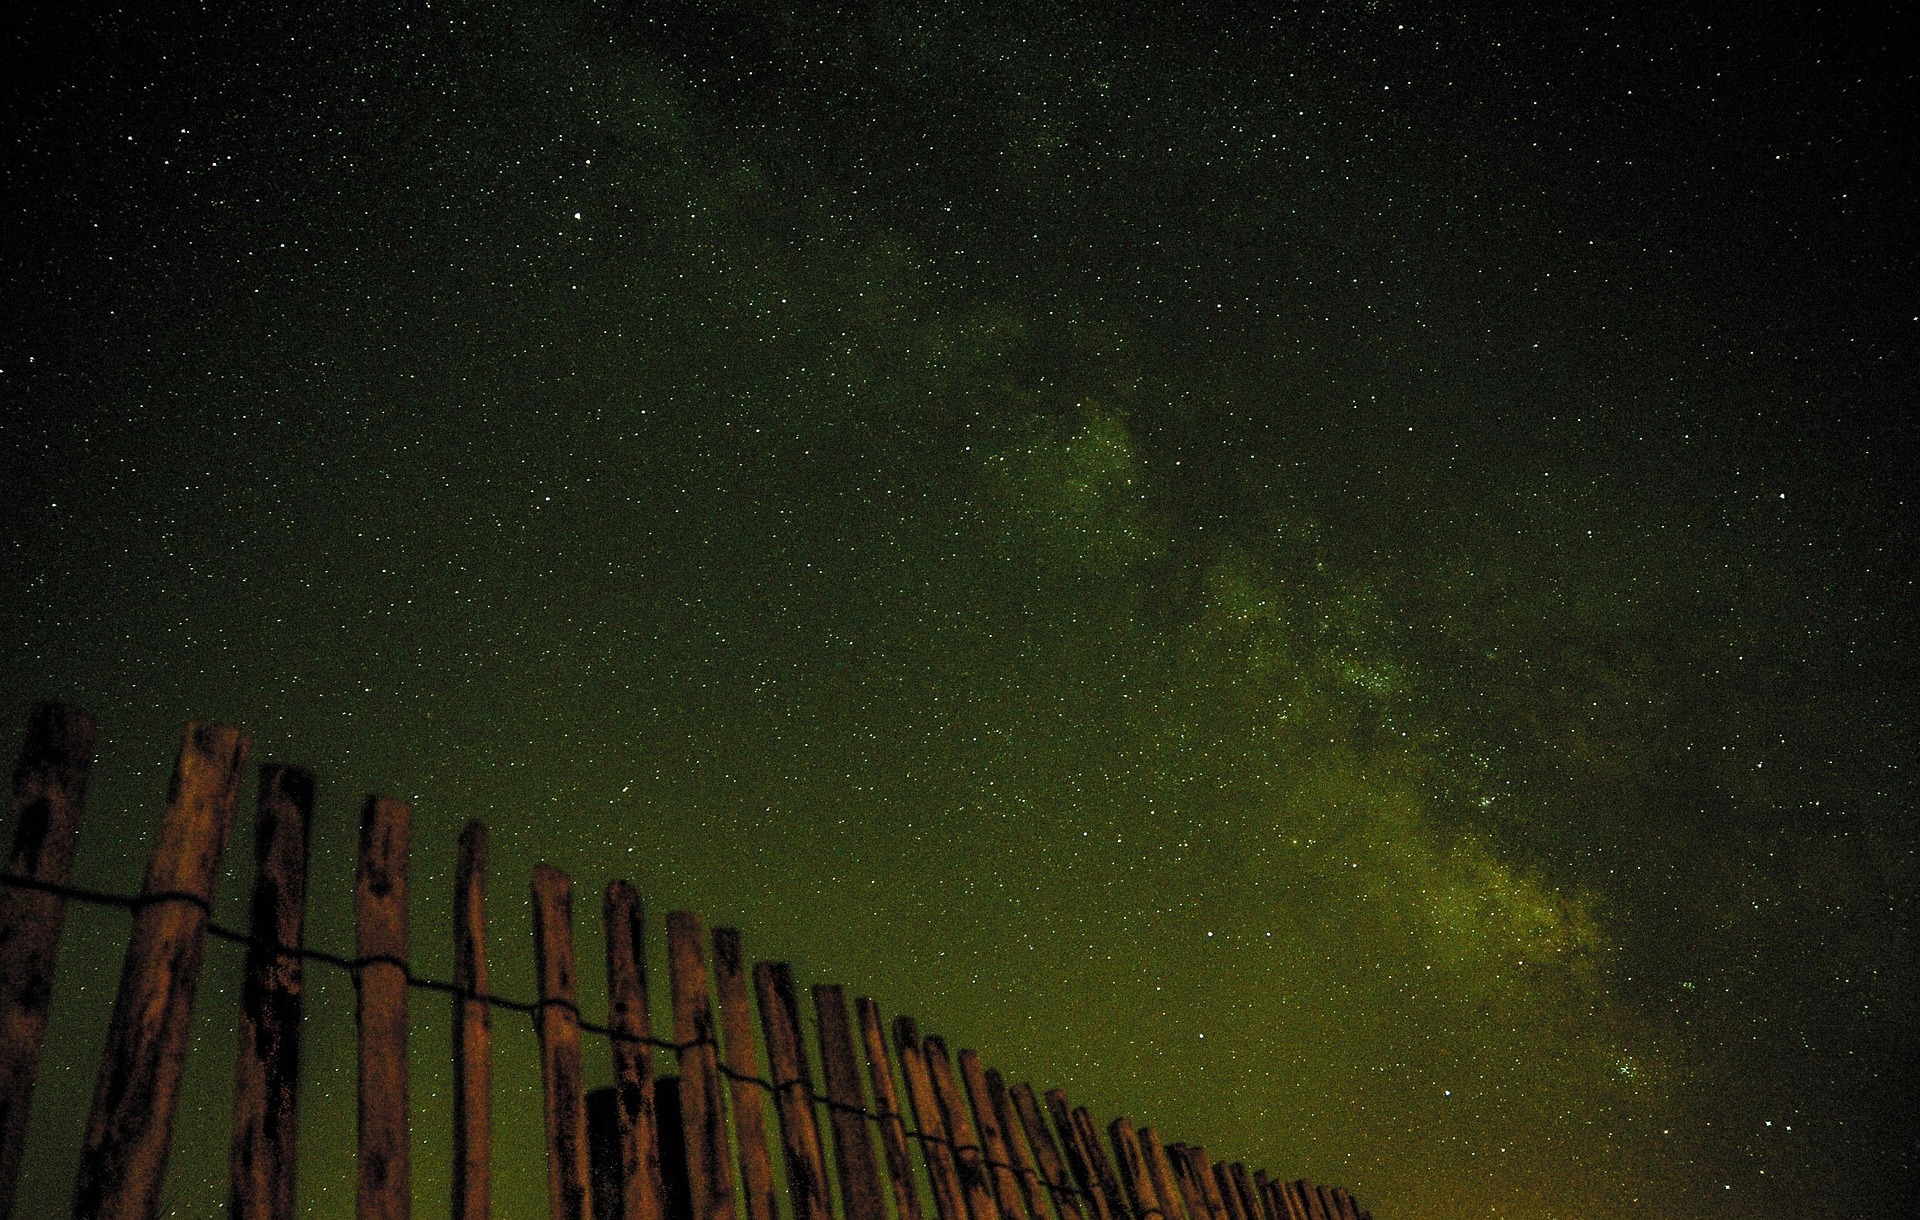 Photograph of a wooden fence against a star-filled night sky